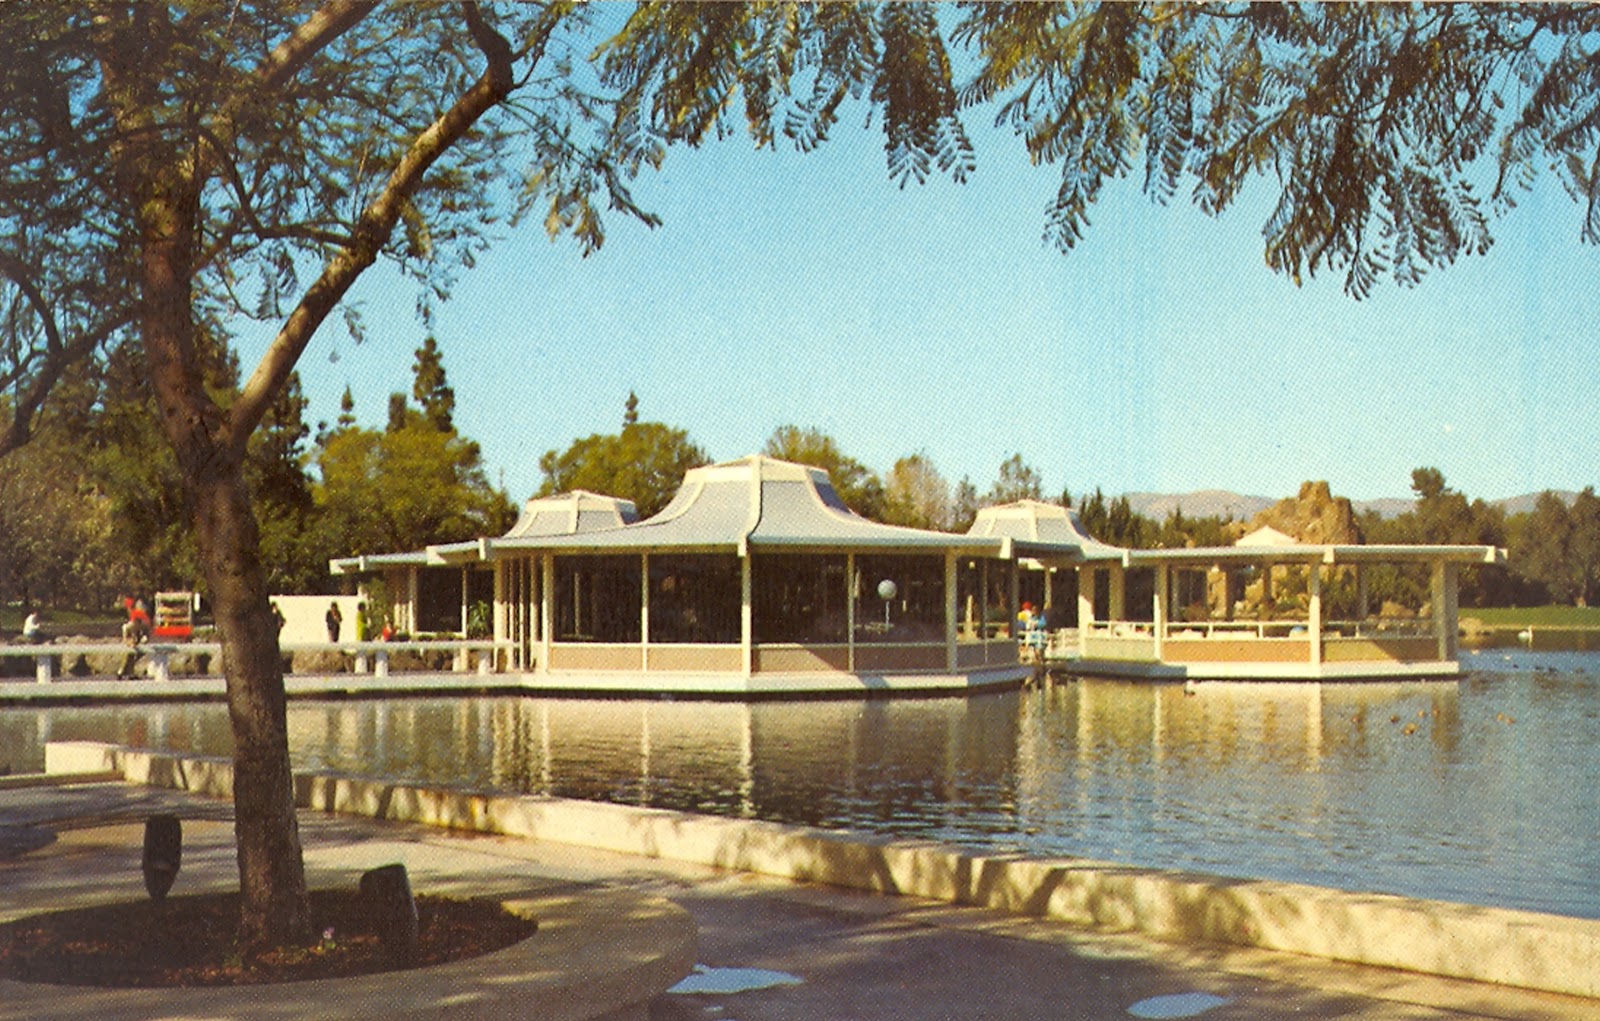 The Museum Of The San Fernando Valley Busch Gardens Was A Holiday